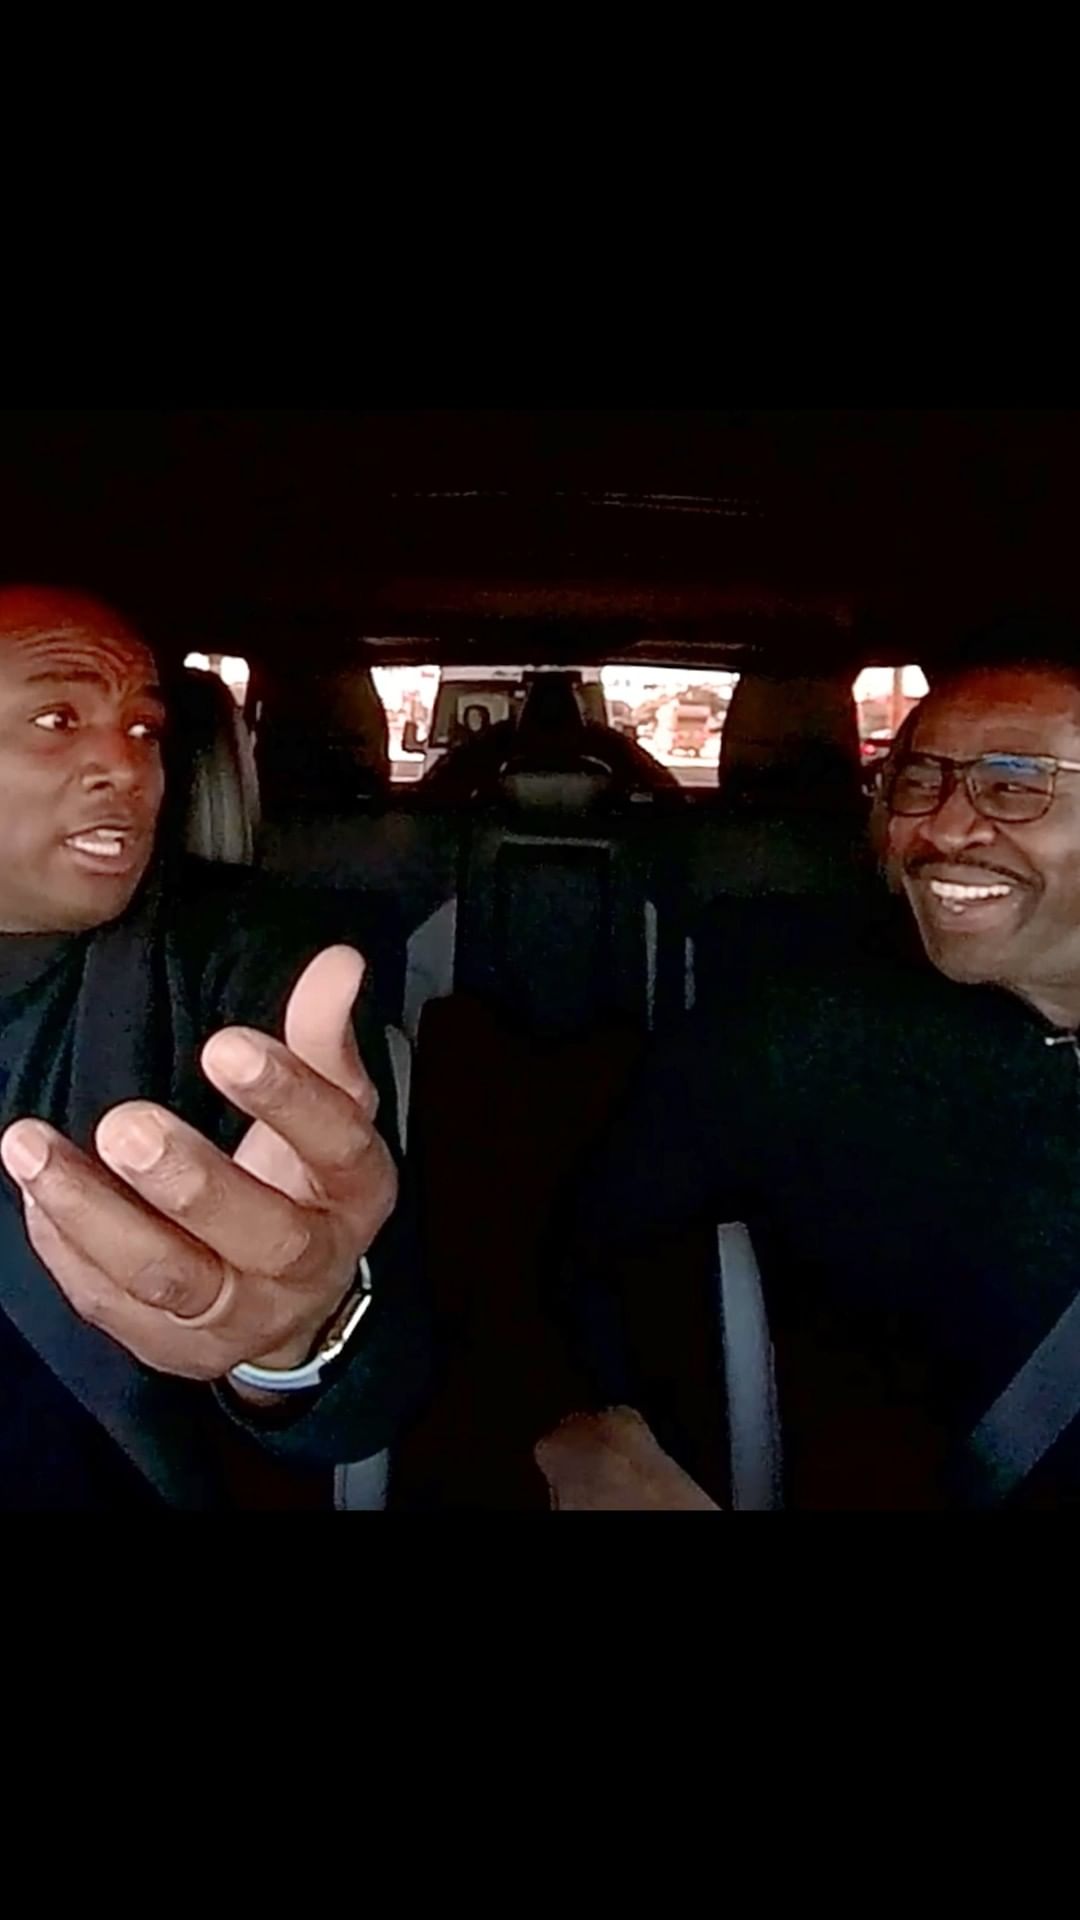 "Who is this young dude?"  Ride to #Victory with @demarcusware & @michaelirvin8...